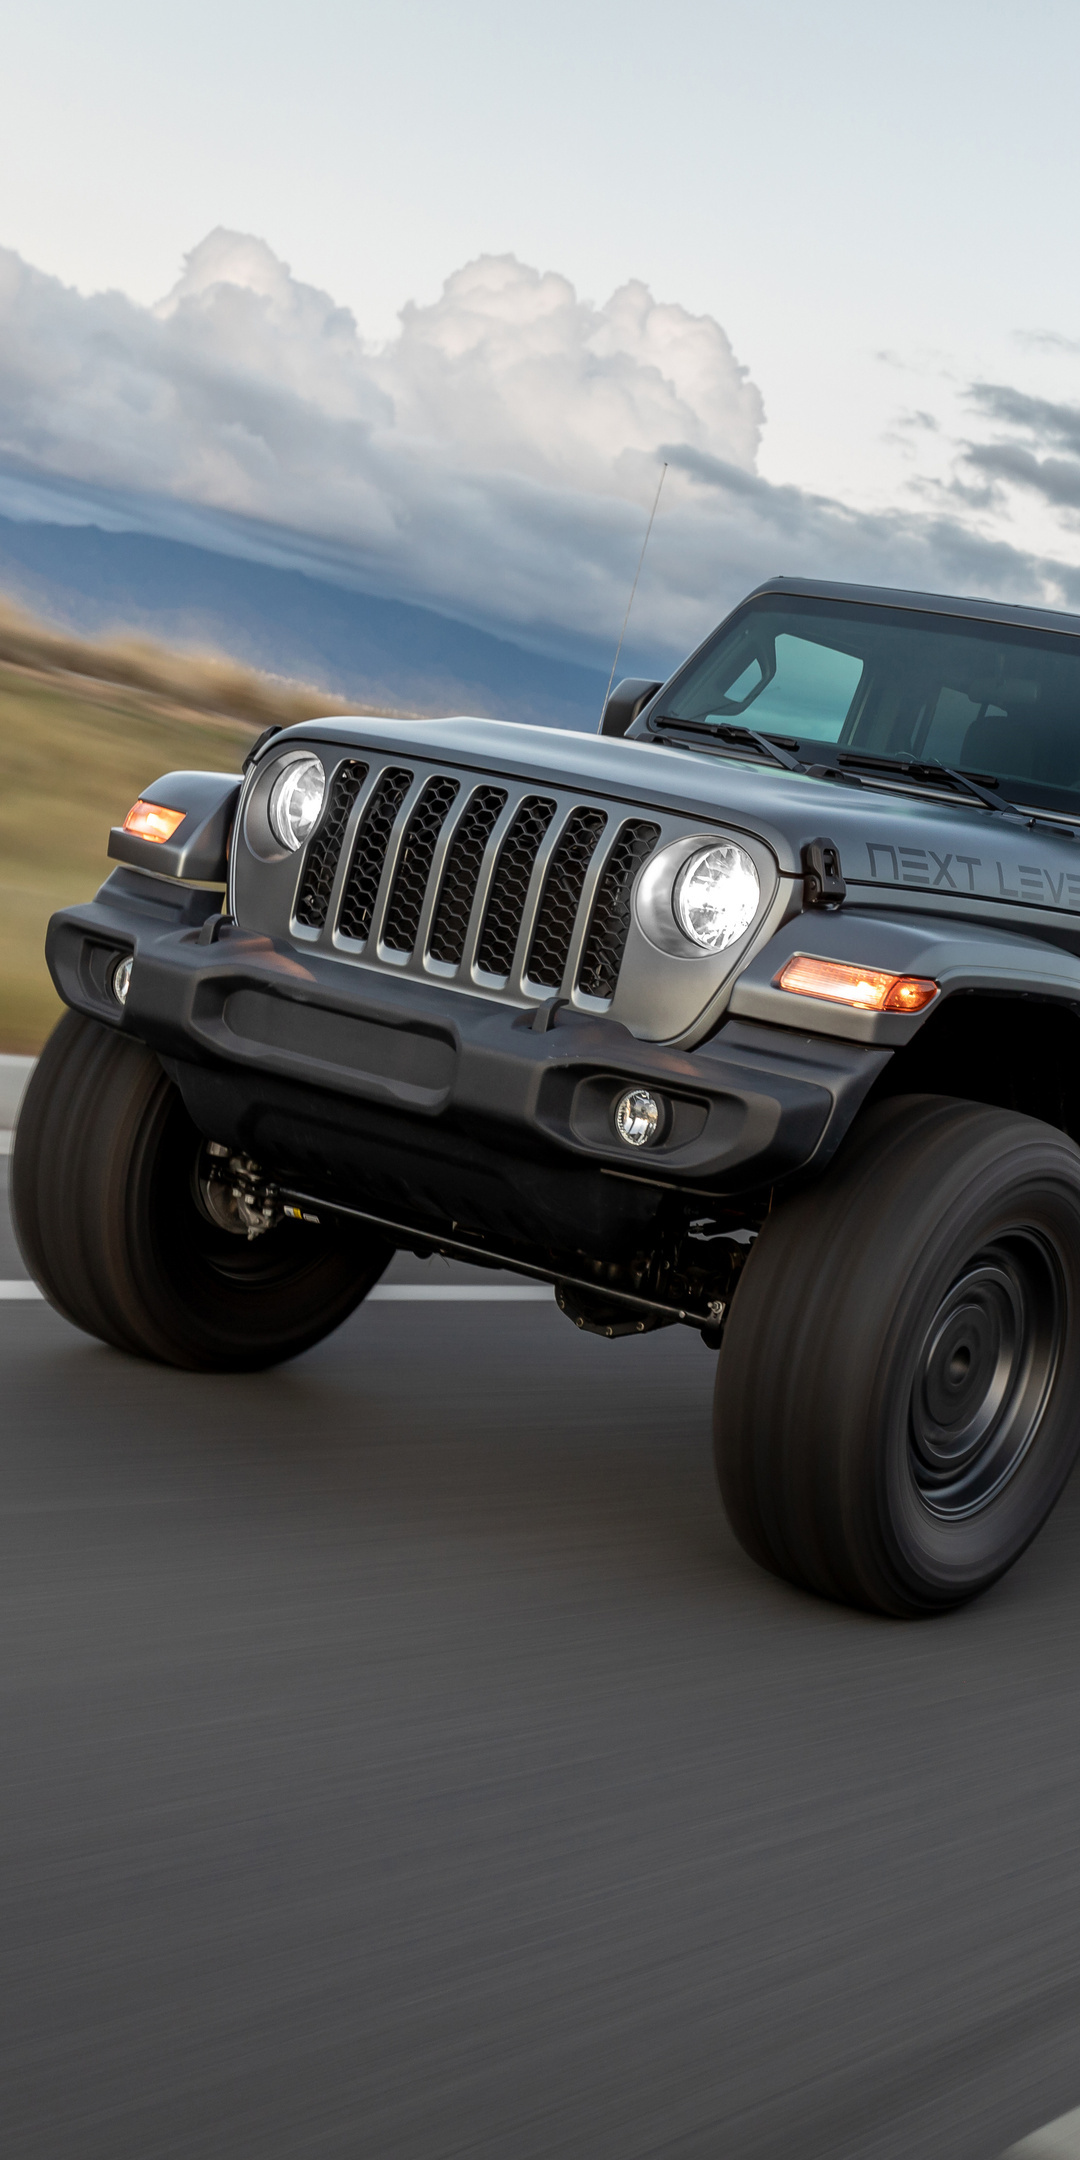 Jeep Gladiator, Next level, 2021 release, One plus 5t, 1080x2160 HD Phone